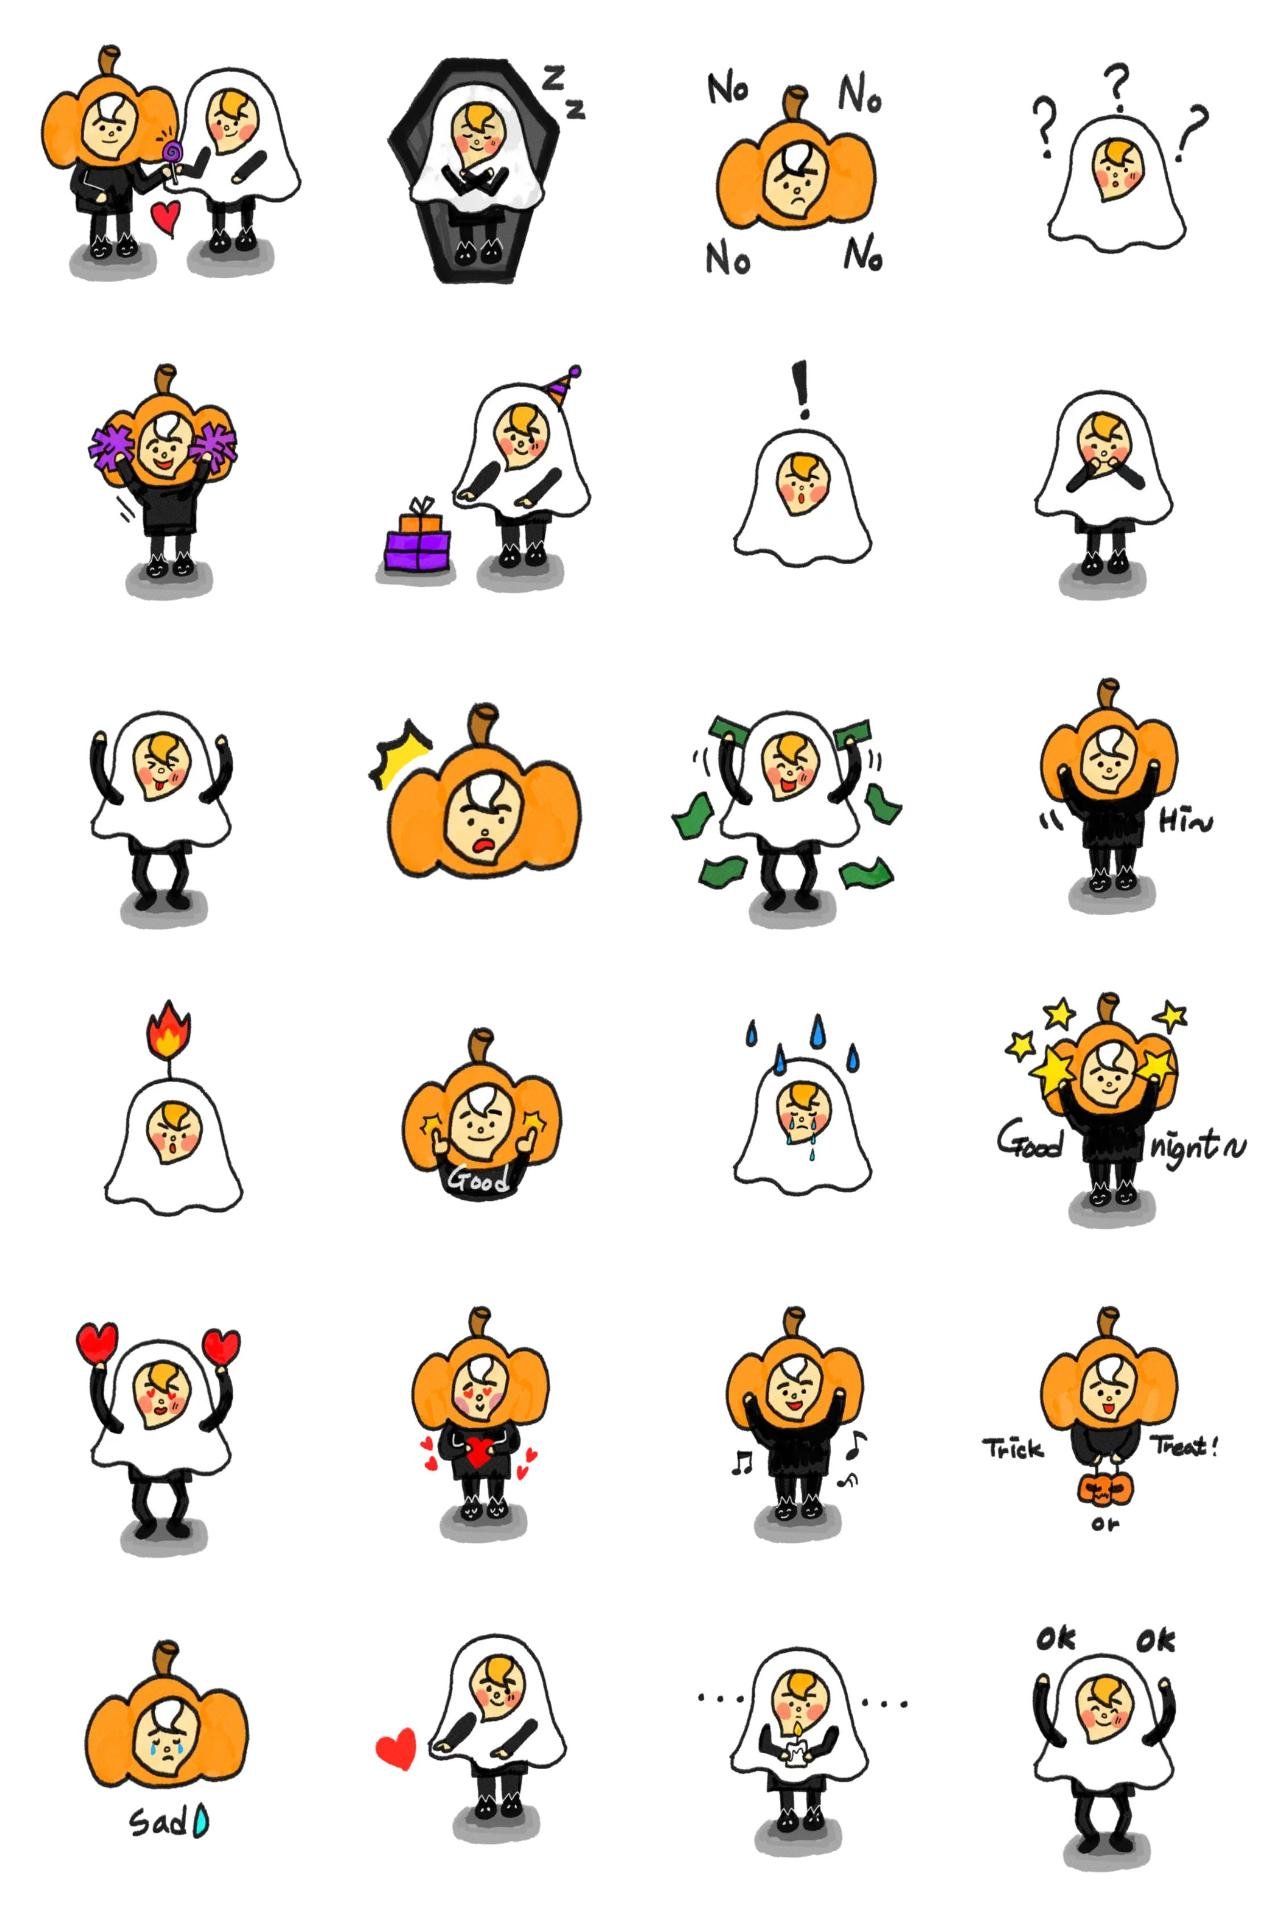 Pumpkin Boy & Ghost Girl Halloween sticker pack for Whatsapp, Telegram, Signal, and others chatting and message apps